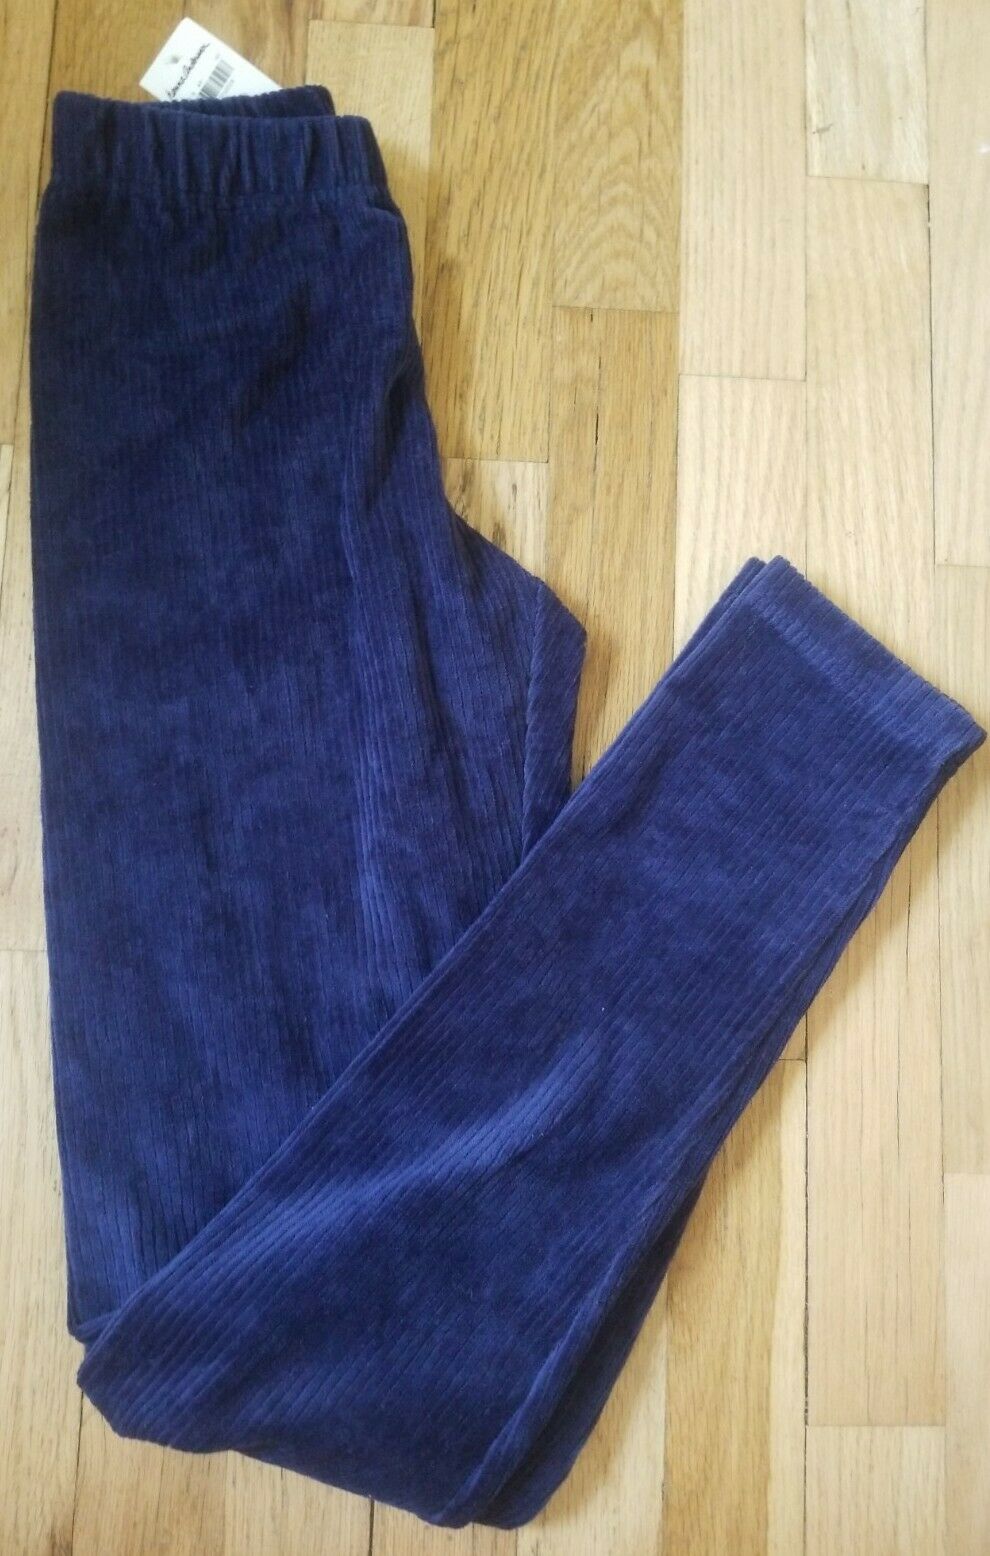 Nwt Hanna Andersson Navy Blue Velour Ribbed Leggings Pants 140 10